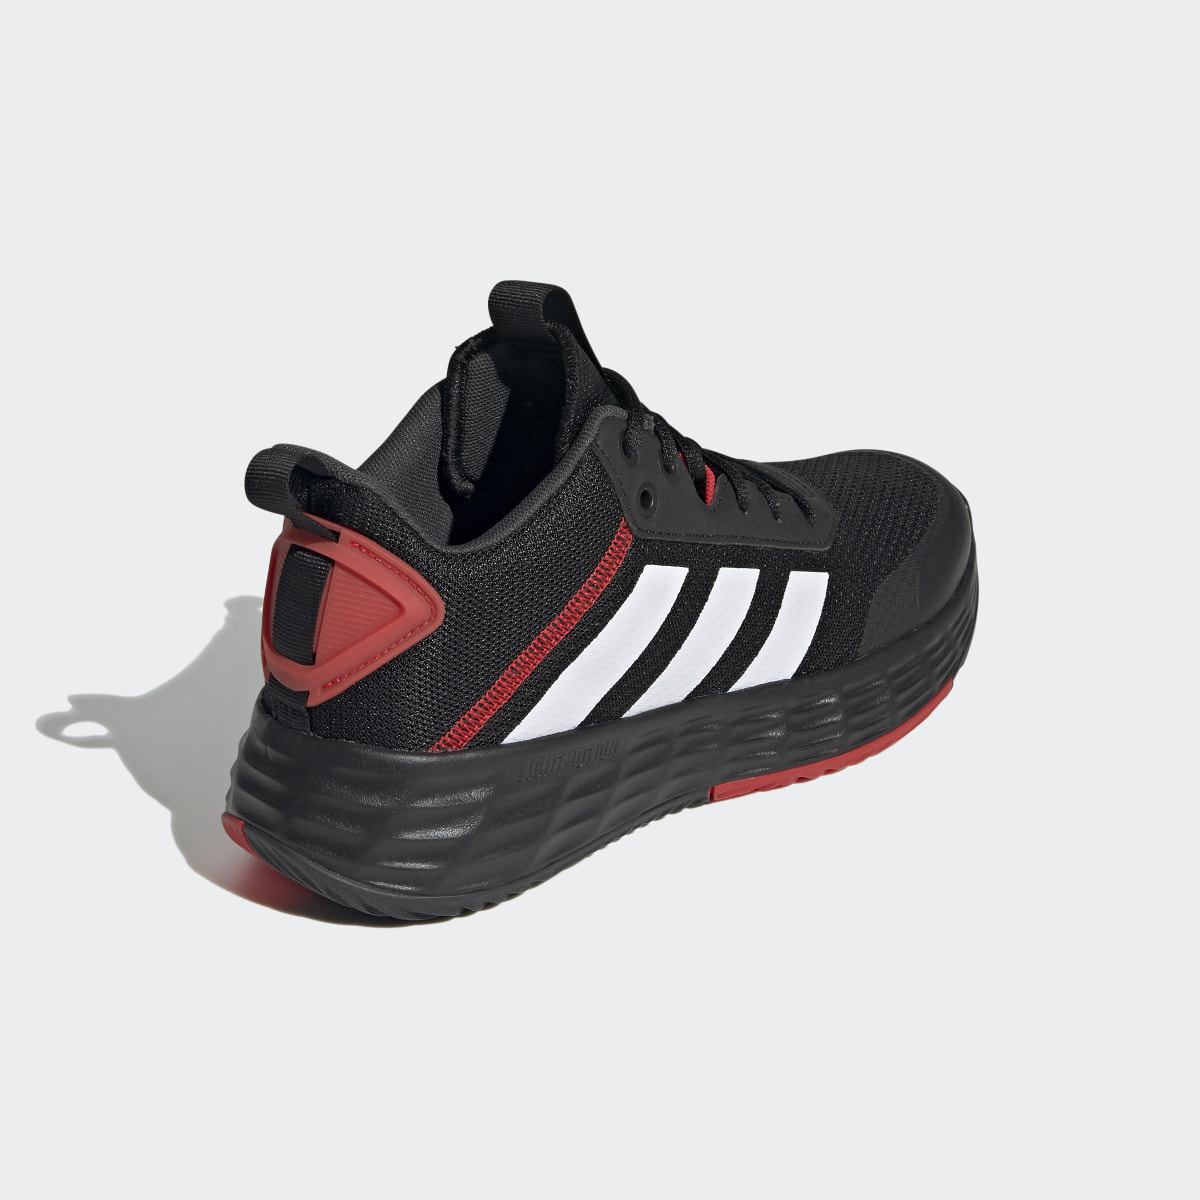 Adidas Ownthegame Shoes. 6